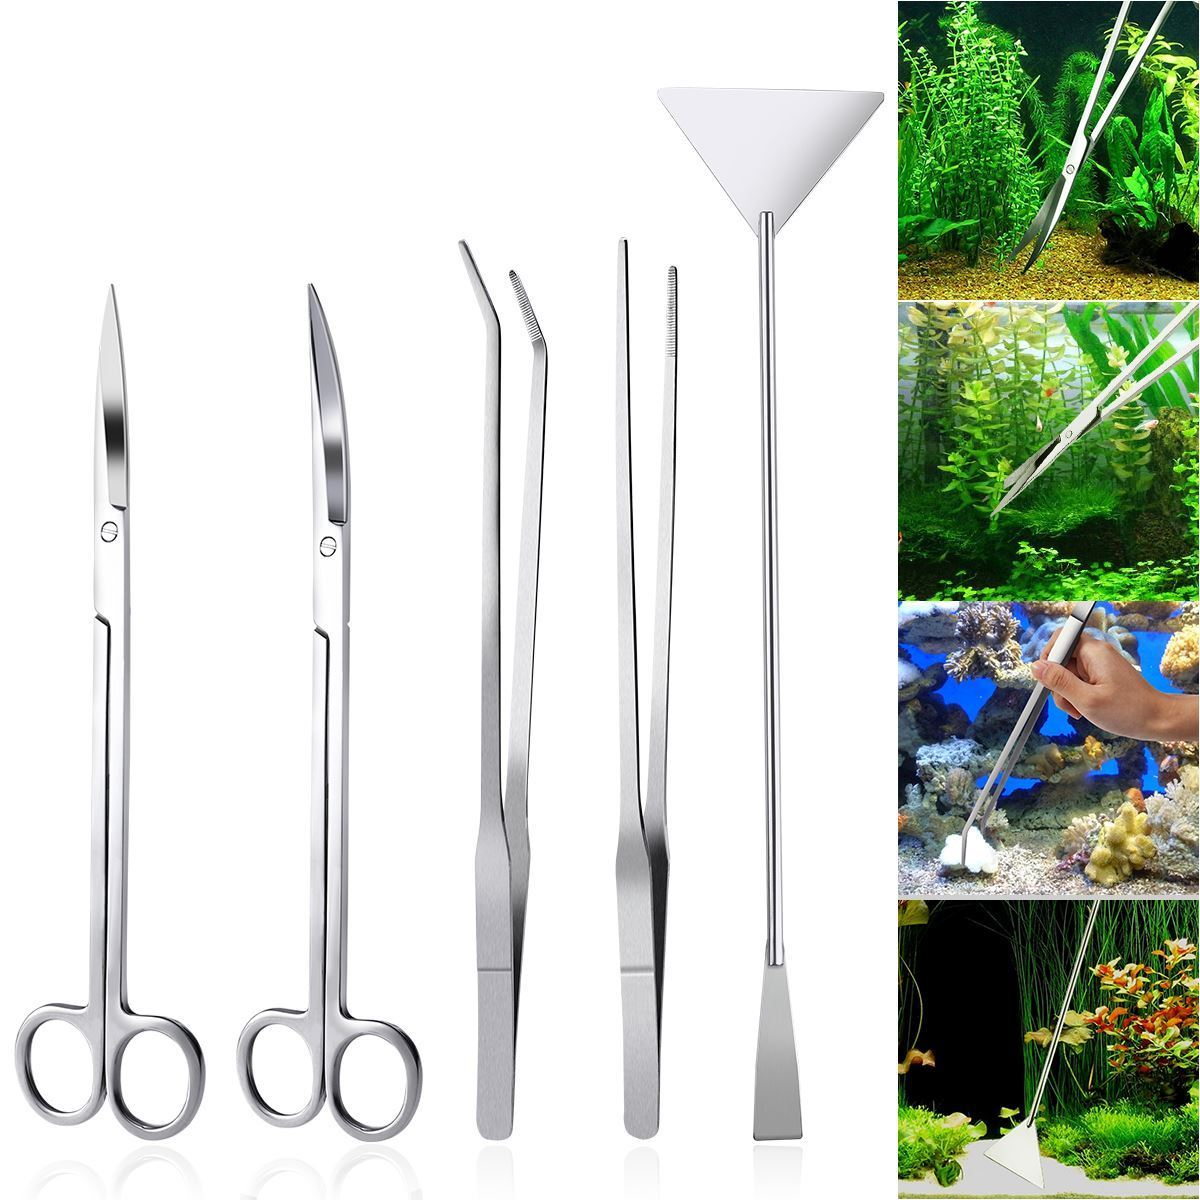 5Pcs-Stainless-Steel-Aquarium-Aquascaping-Tank-Aquatic-Plant-Fish-Cutter-Tweezers-Tool-with-Pouch-1378932-6